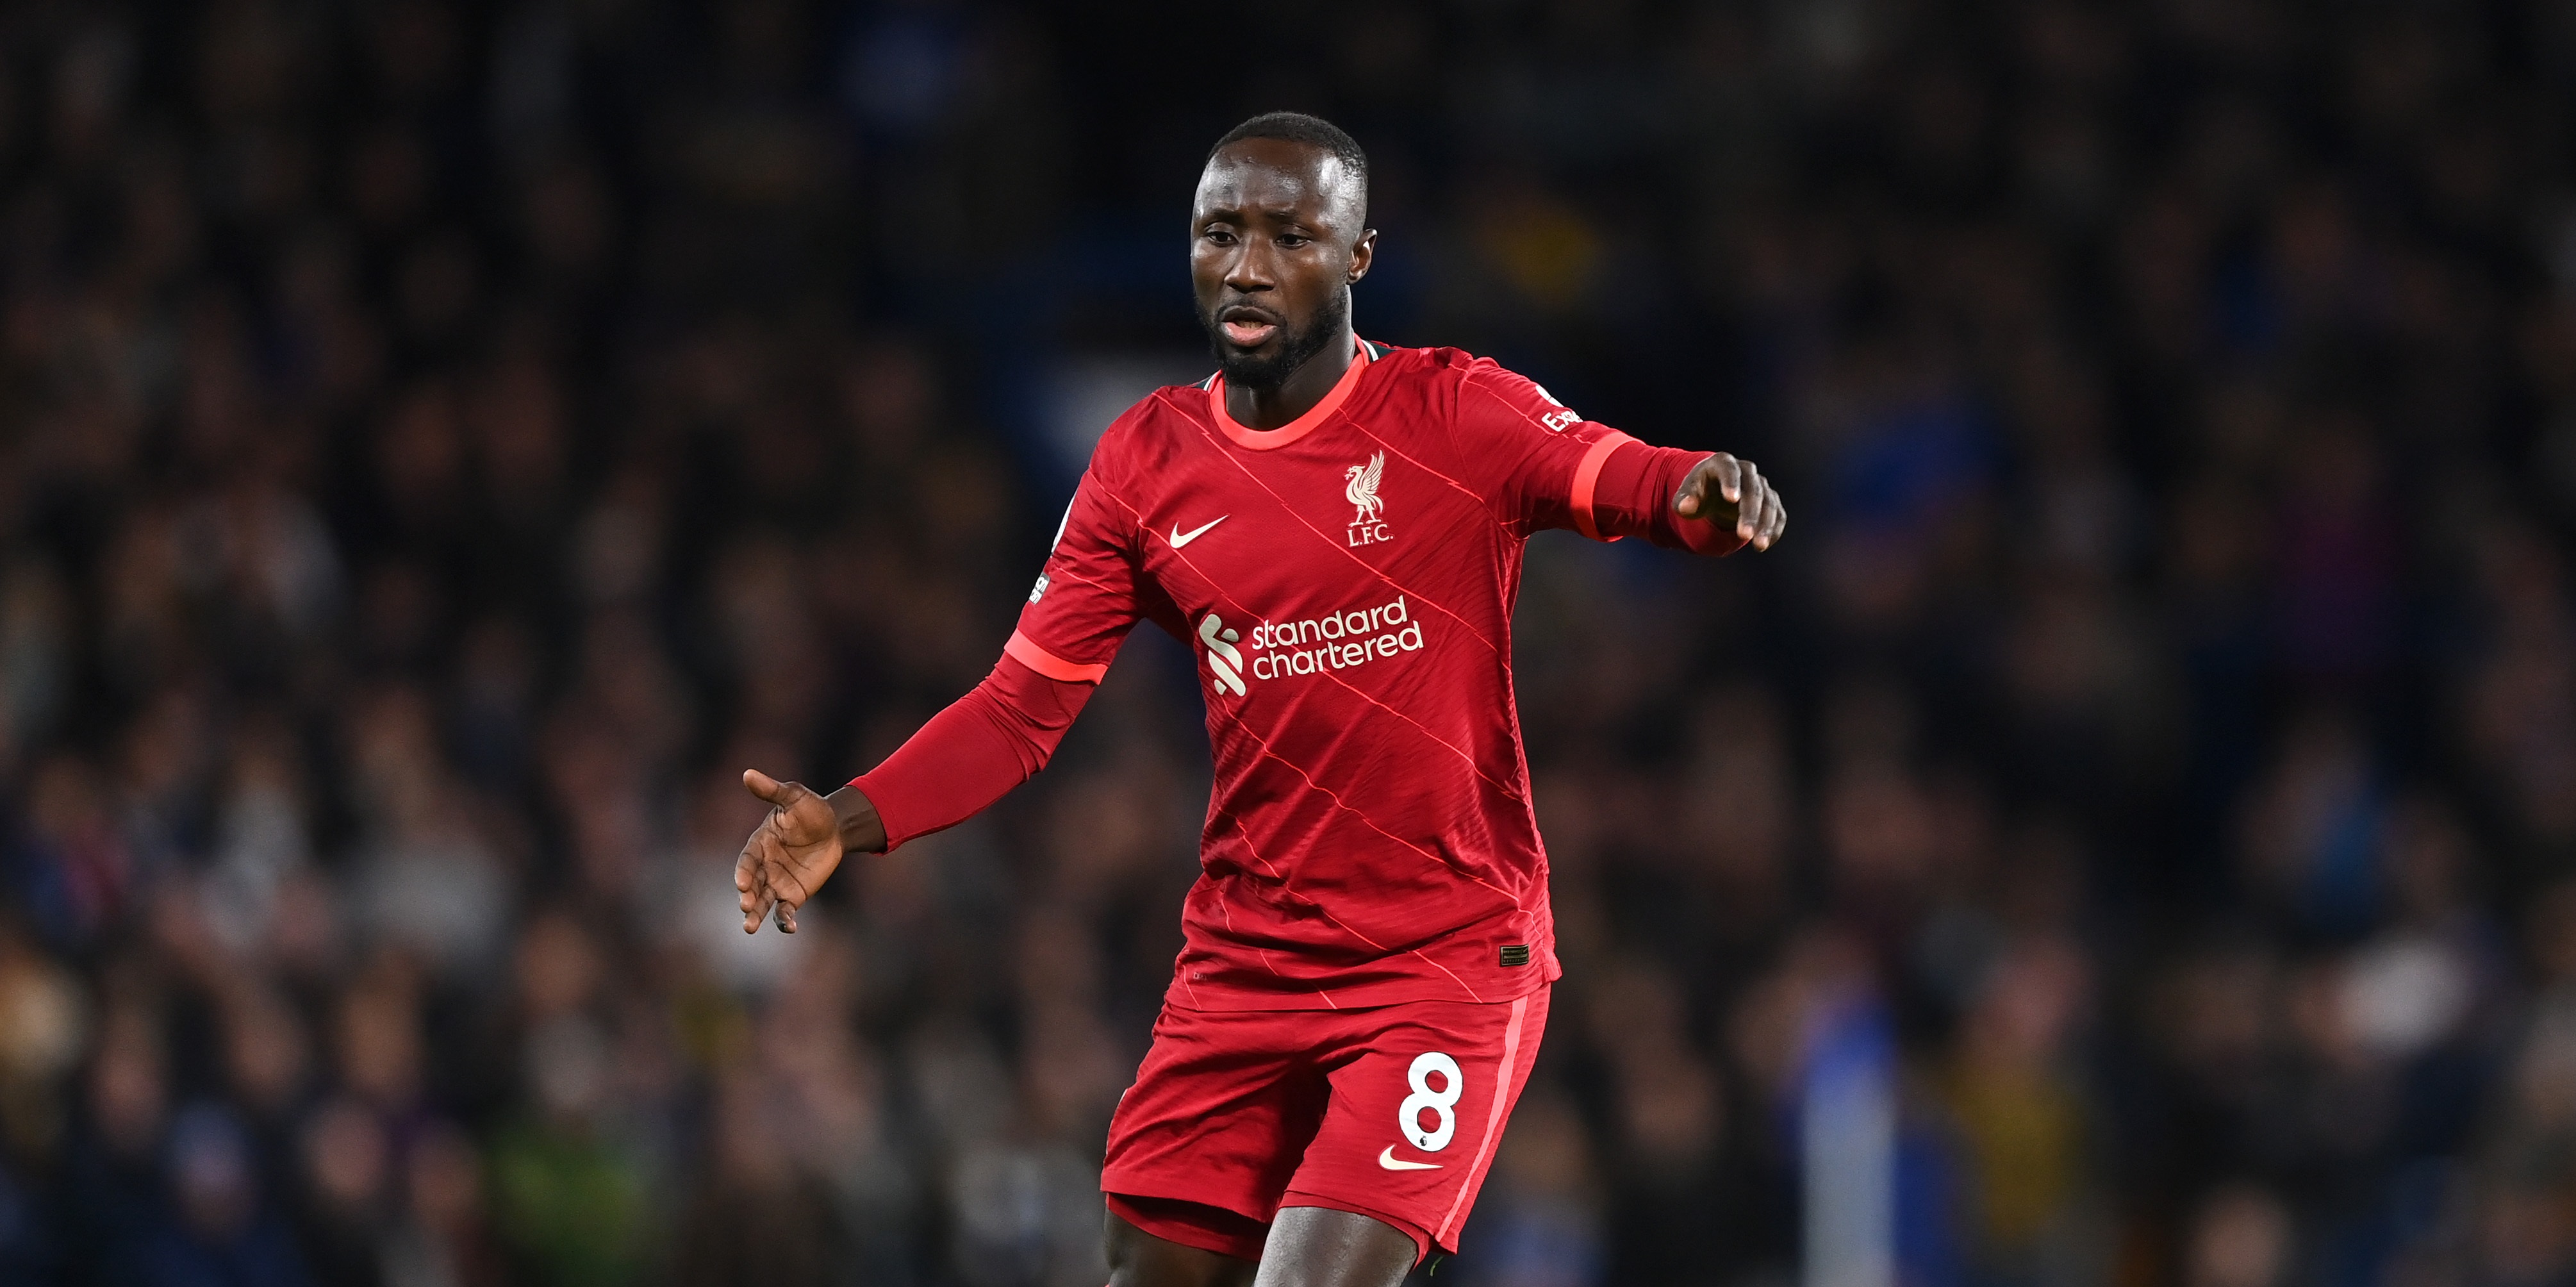 Naby Keita claims Liverpool are yet to see the ‘real’ him since his move from RB Leipzig in 2018